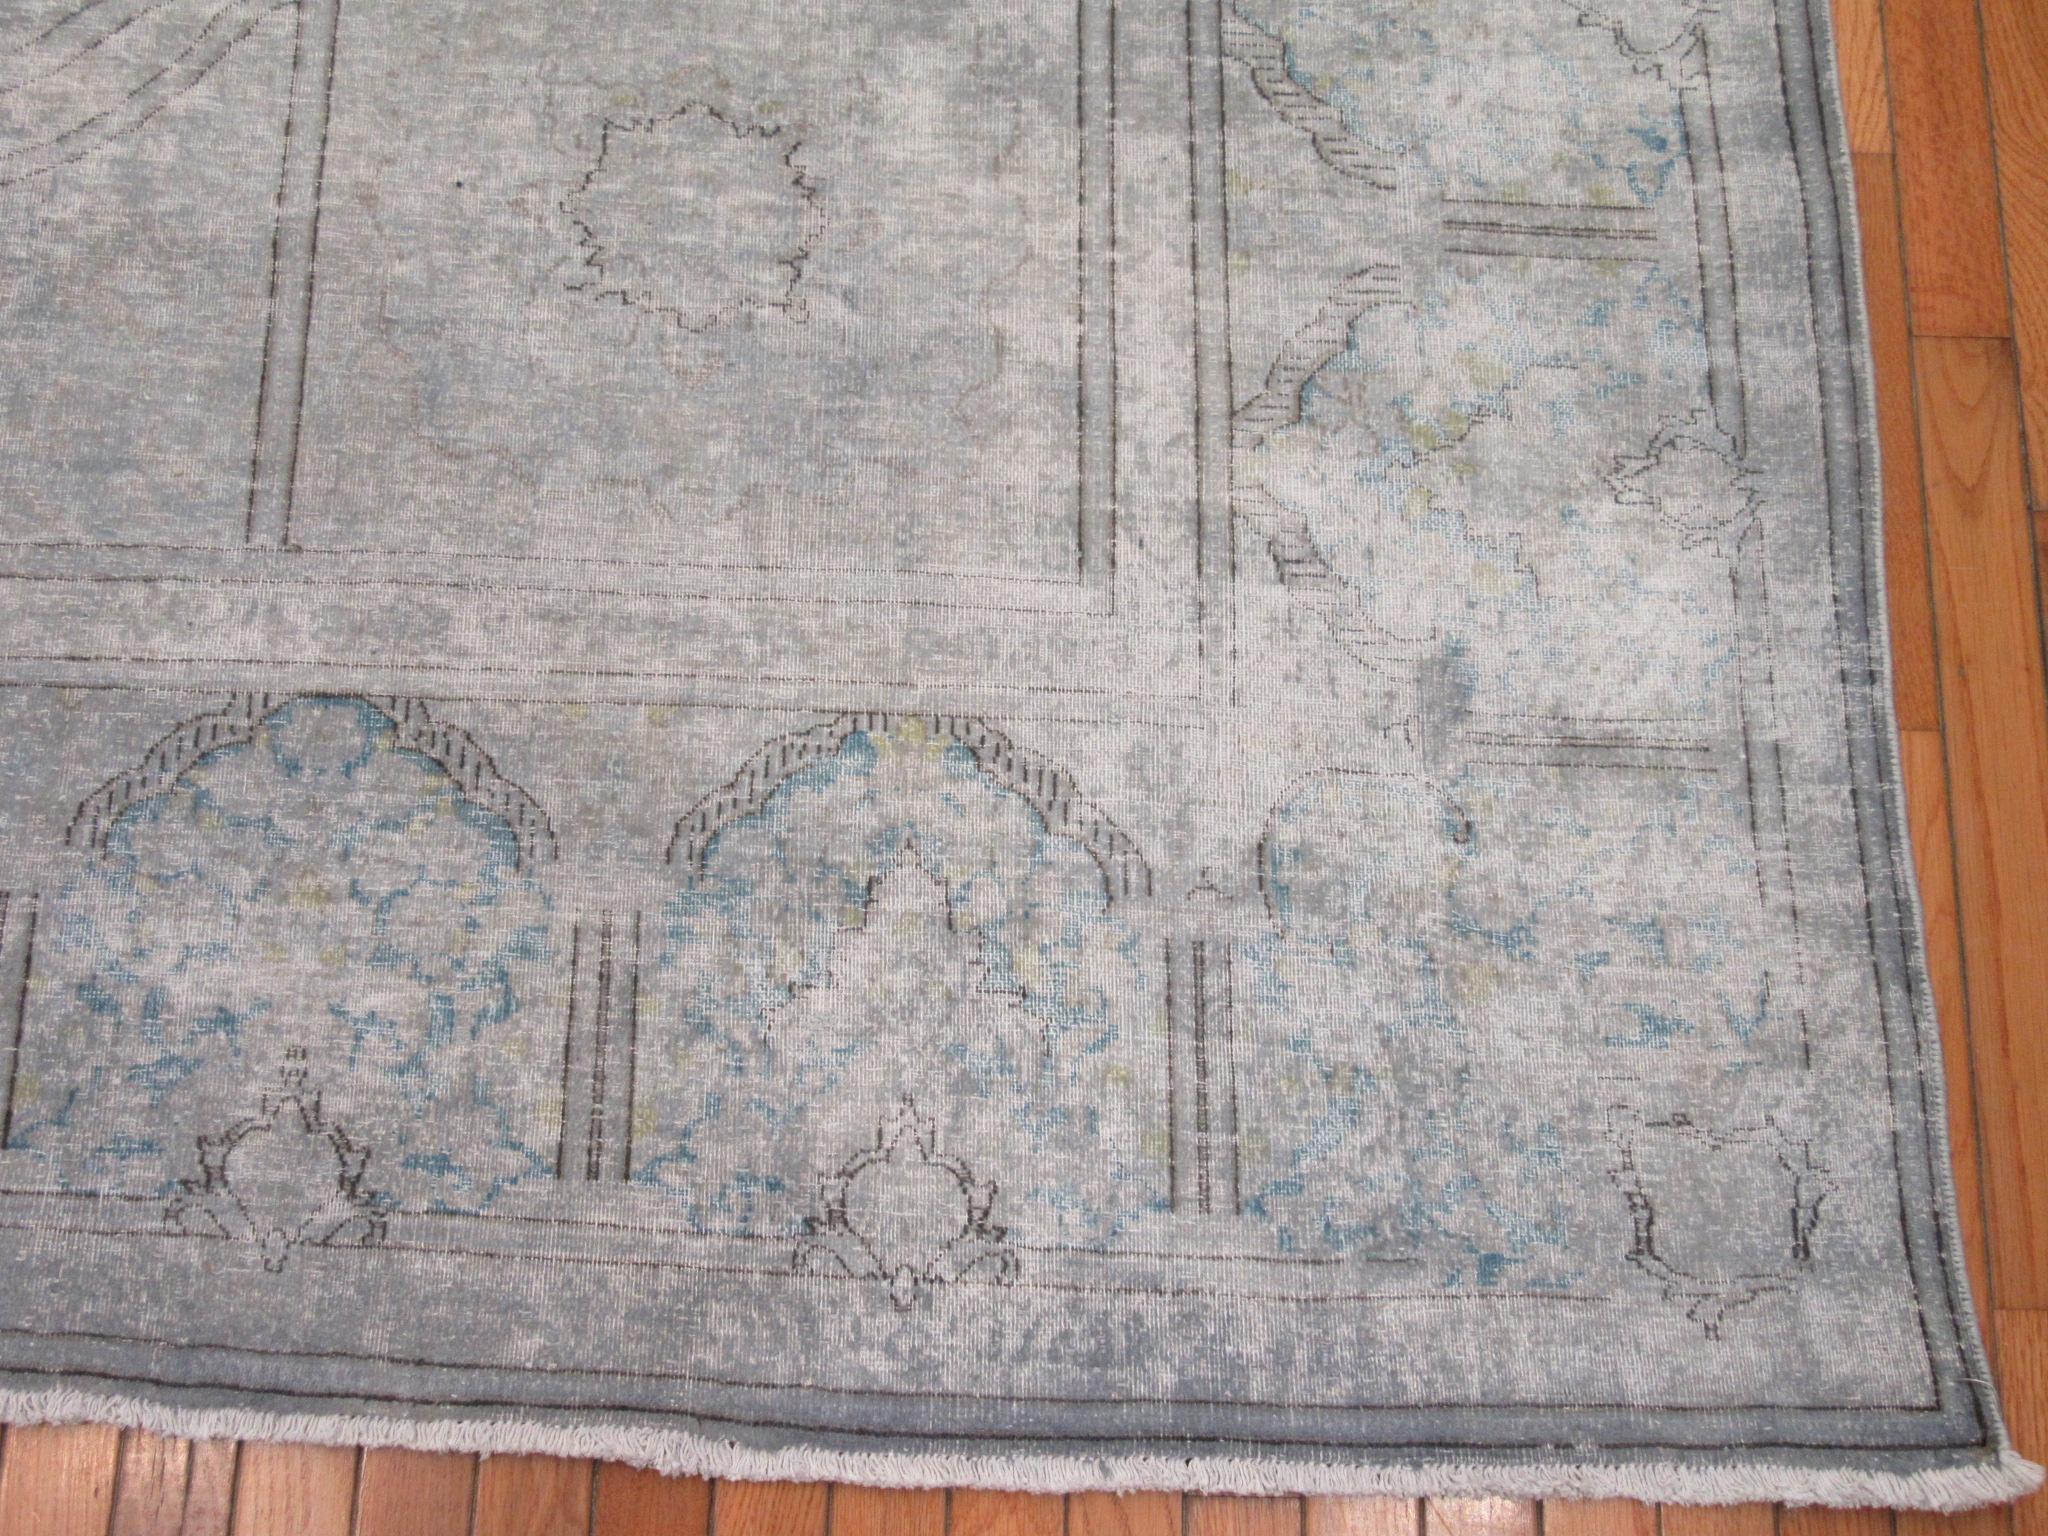 This is an room size vintage distressed hand knotted Persian Kirman rug. It is made with wool on cotton foundation lightly overdyed in gray color background. It has a traditional open field design with a large medallion.
The rug measures 9' 5” x